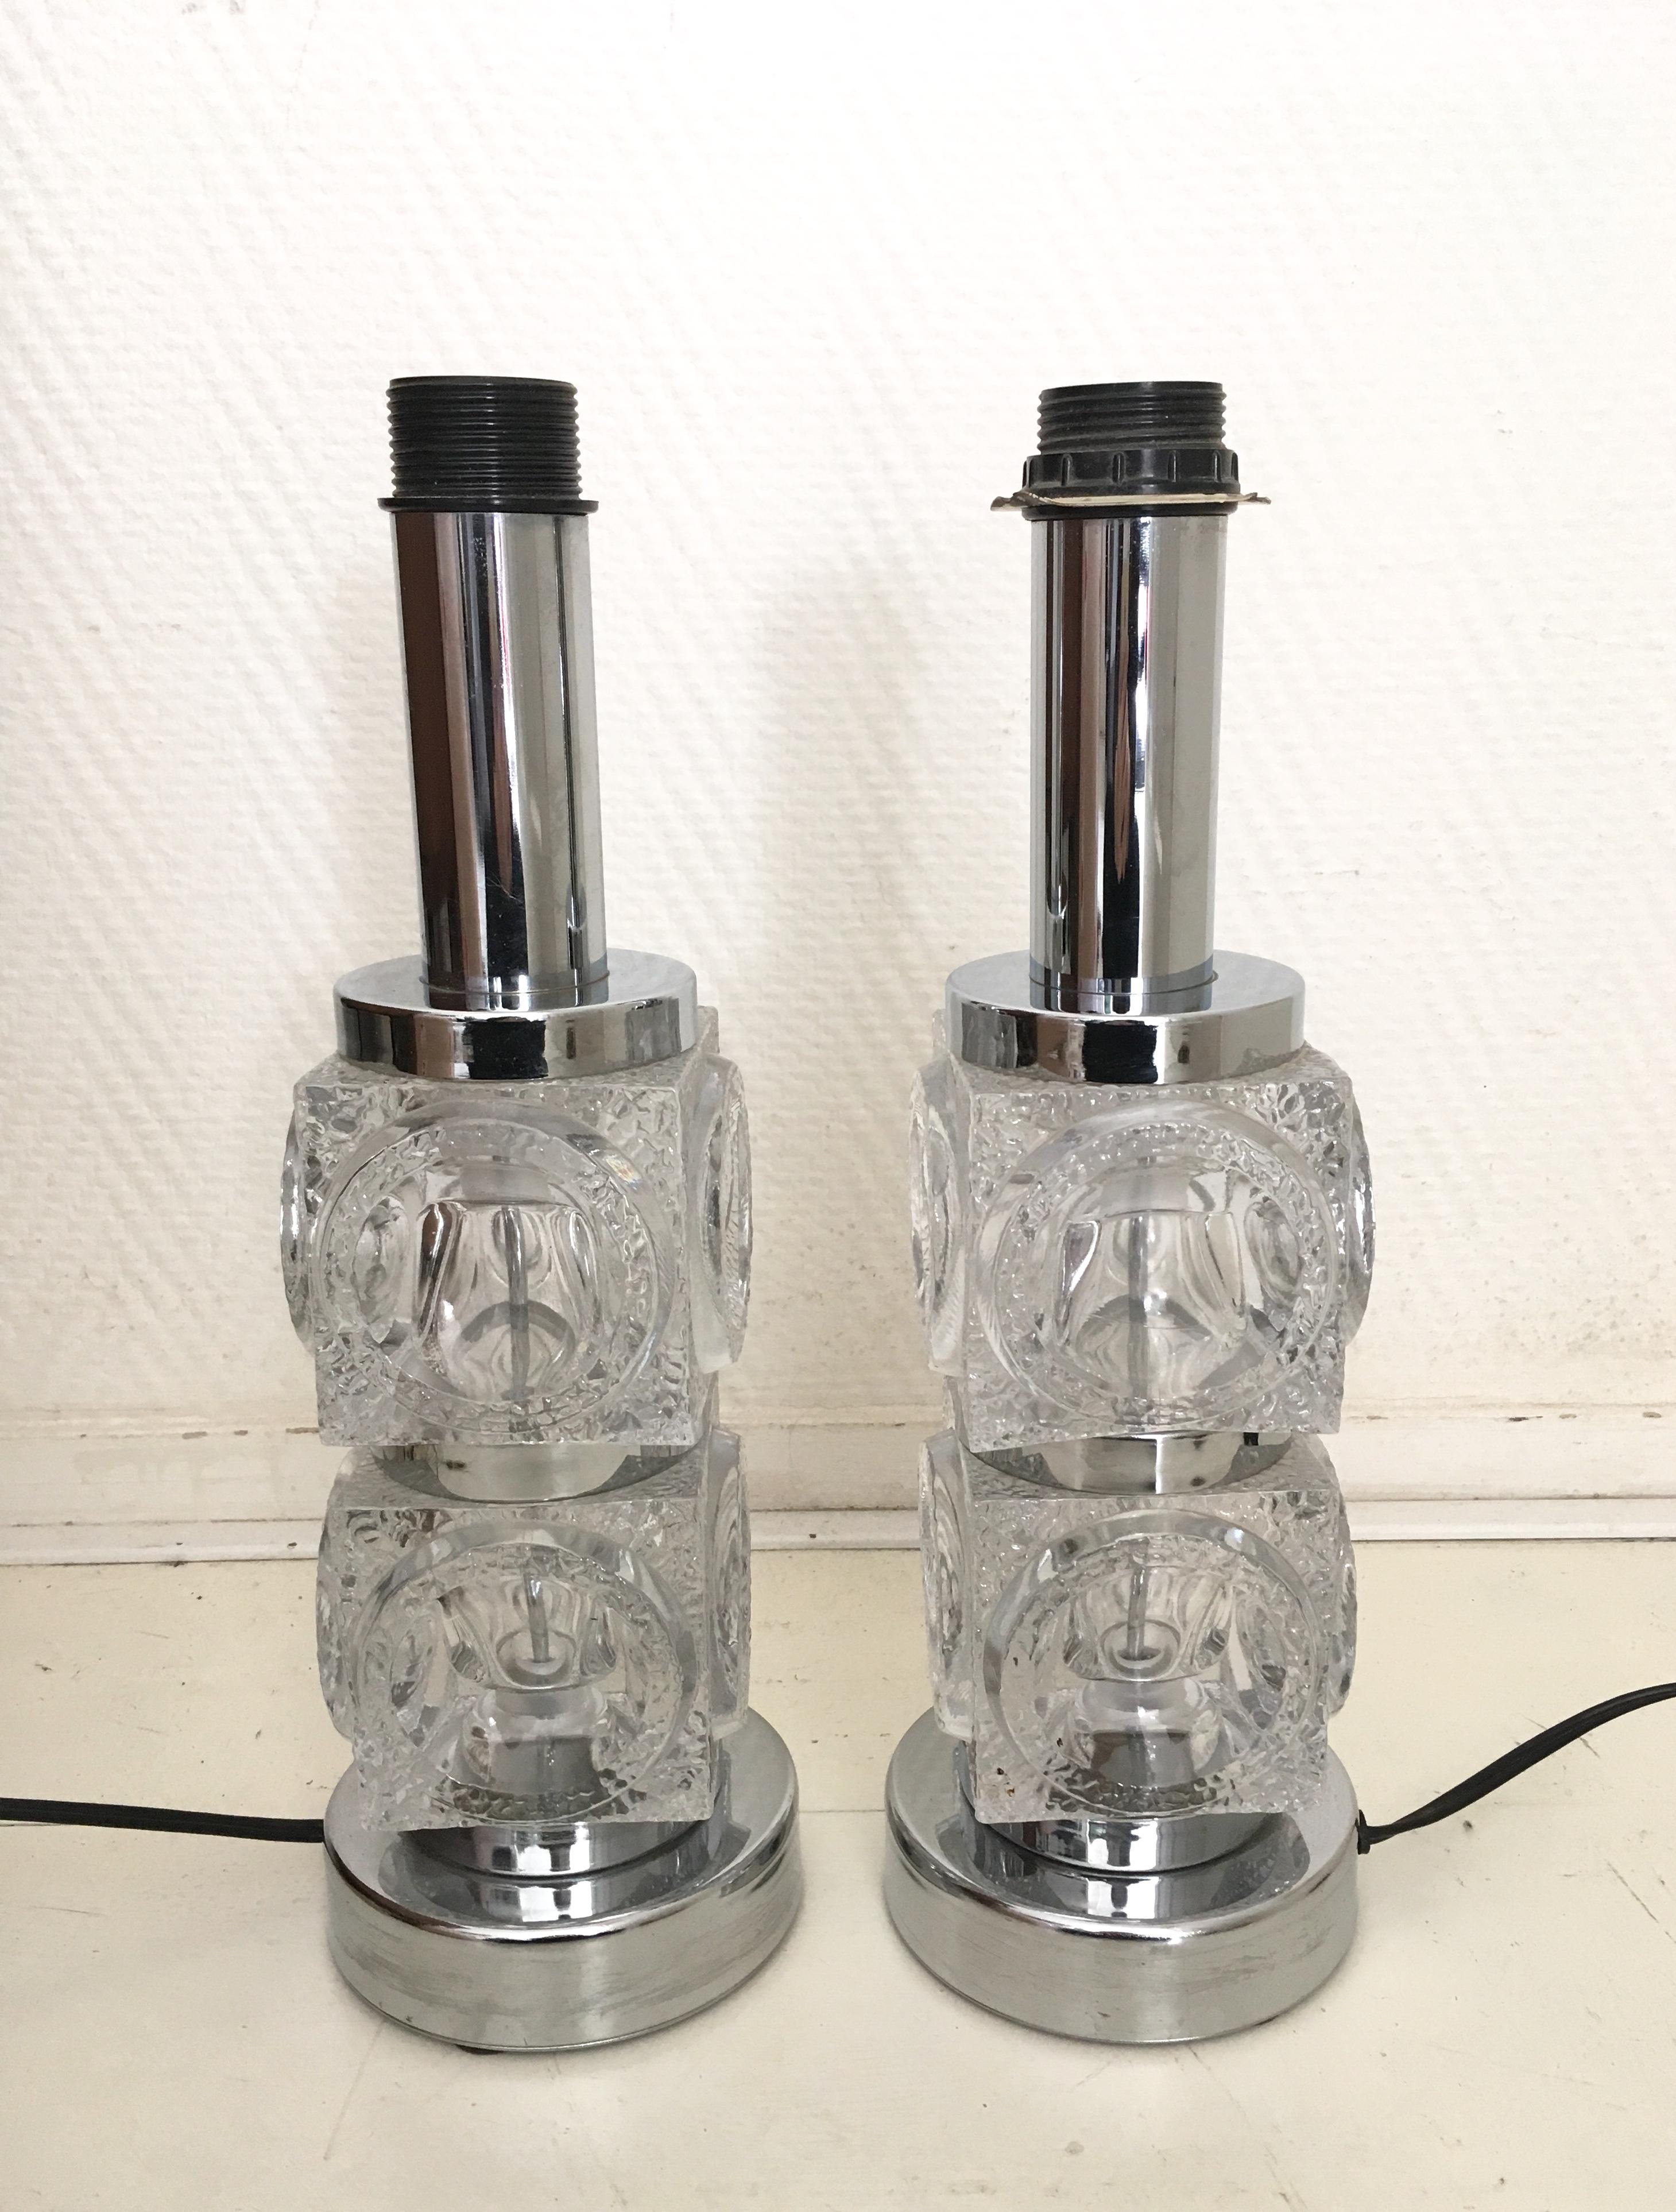 Wonderful chromed lamp base, with two stacked glass cubes. The cubes also feature Cilindric forms. The lamp base remains in original condition with European wiring, which could easily be replaced. Two pieces available. 
Feel free to make us an offer.